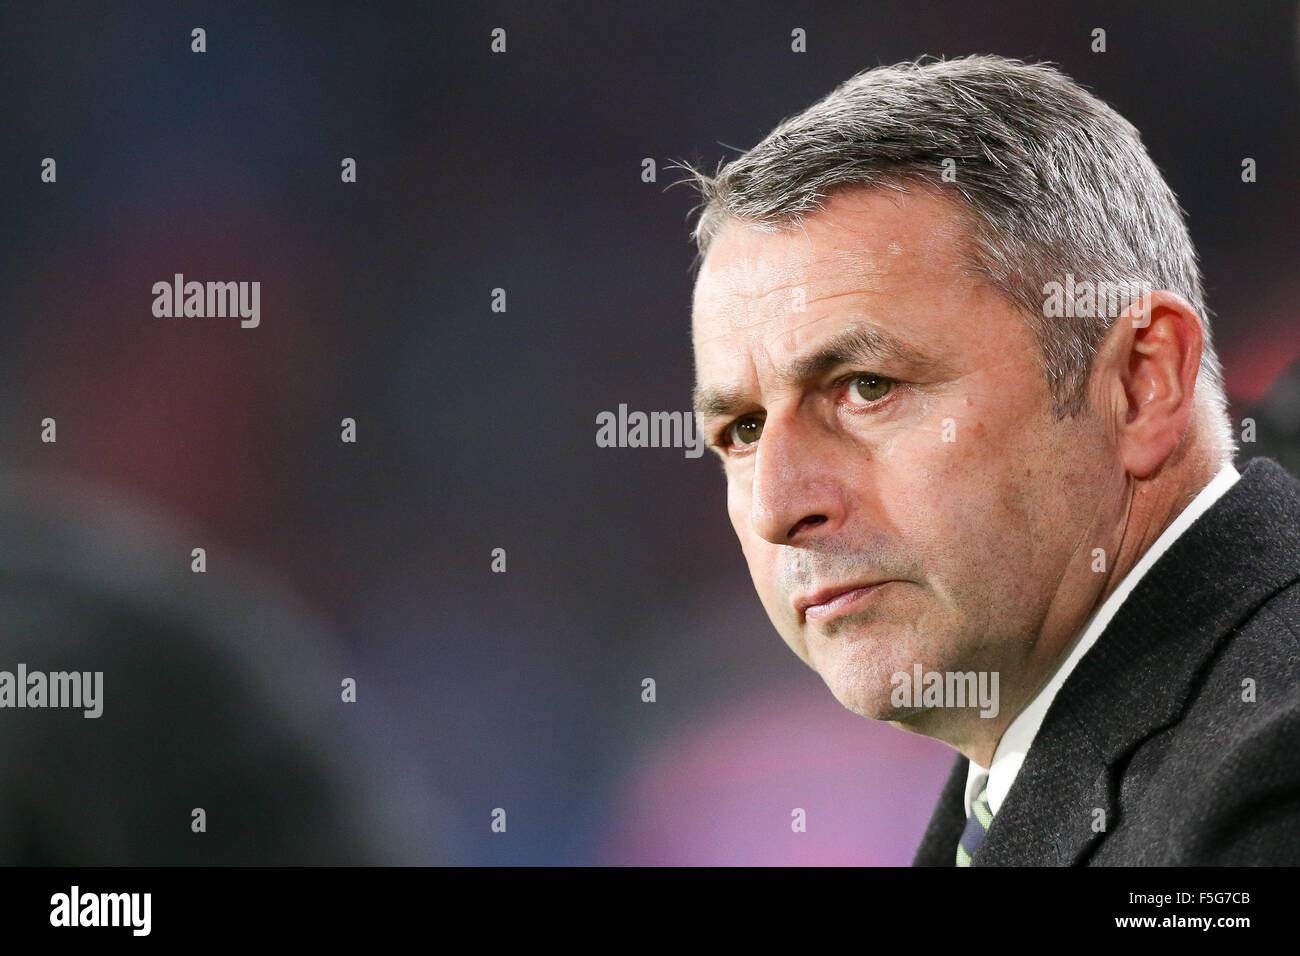 Eindhoven, The Netherlands. 03rd Nov, 2015. Manager Klaus Allofs of Wolfsburg prior to the UEFA Champions League Group B soccer match between PSV Eindhoven and VfL Wolfsburg at the PSV Stadium in Eindhoven, The Netherlands, 03 November 2015. Photo: Maja Hitij/dpa/Alamy Live News Stock Photo